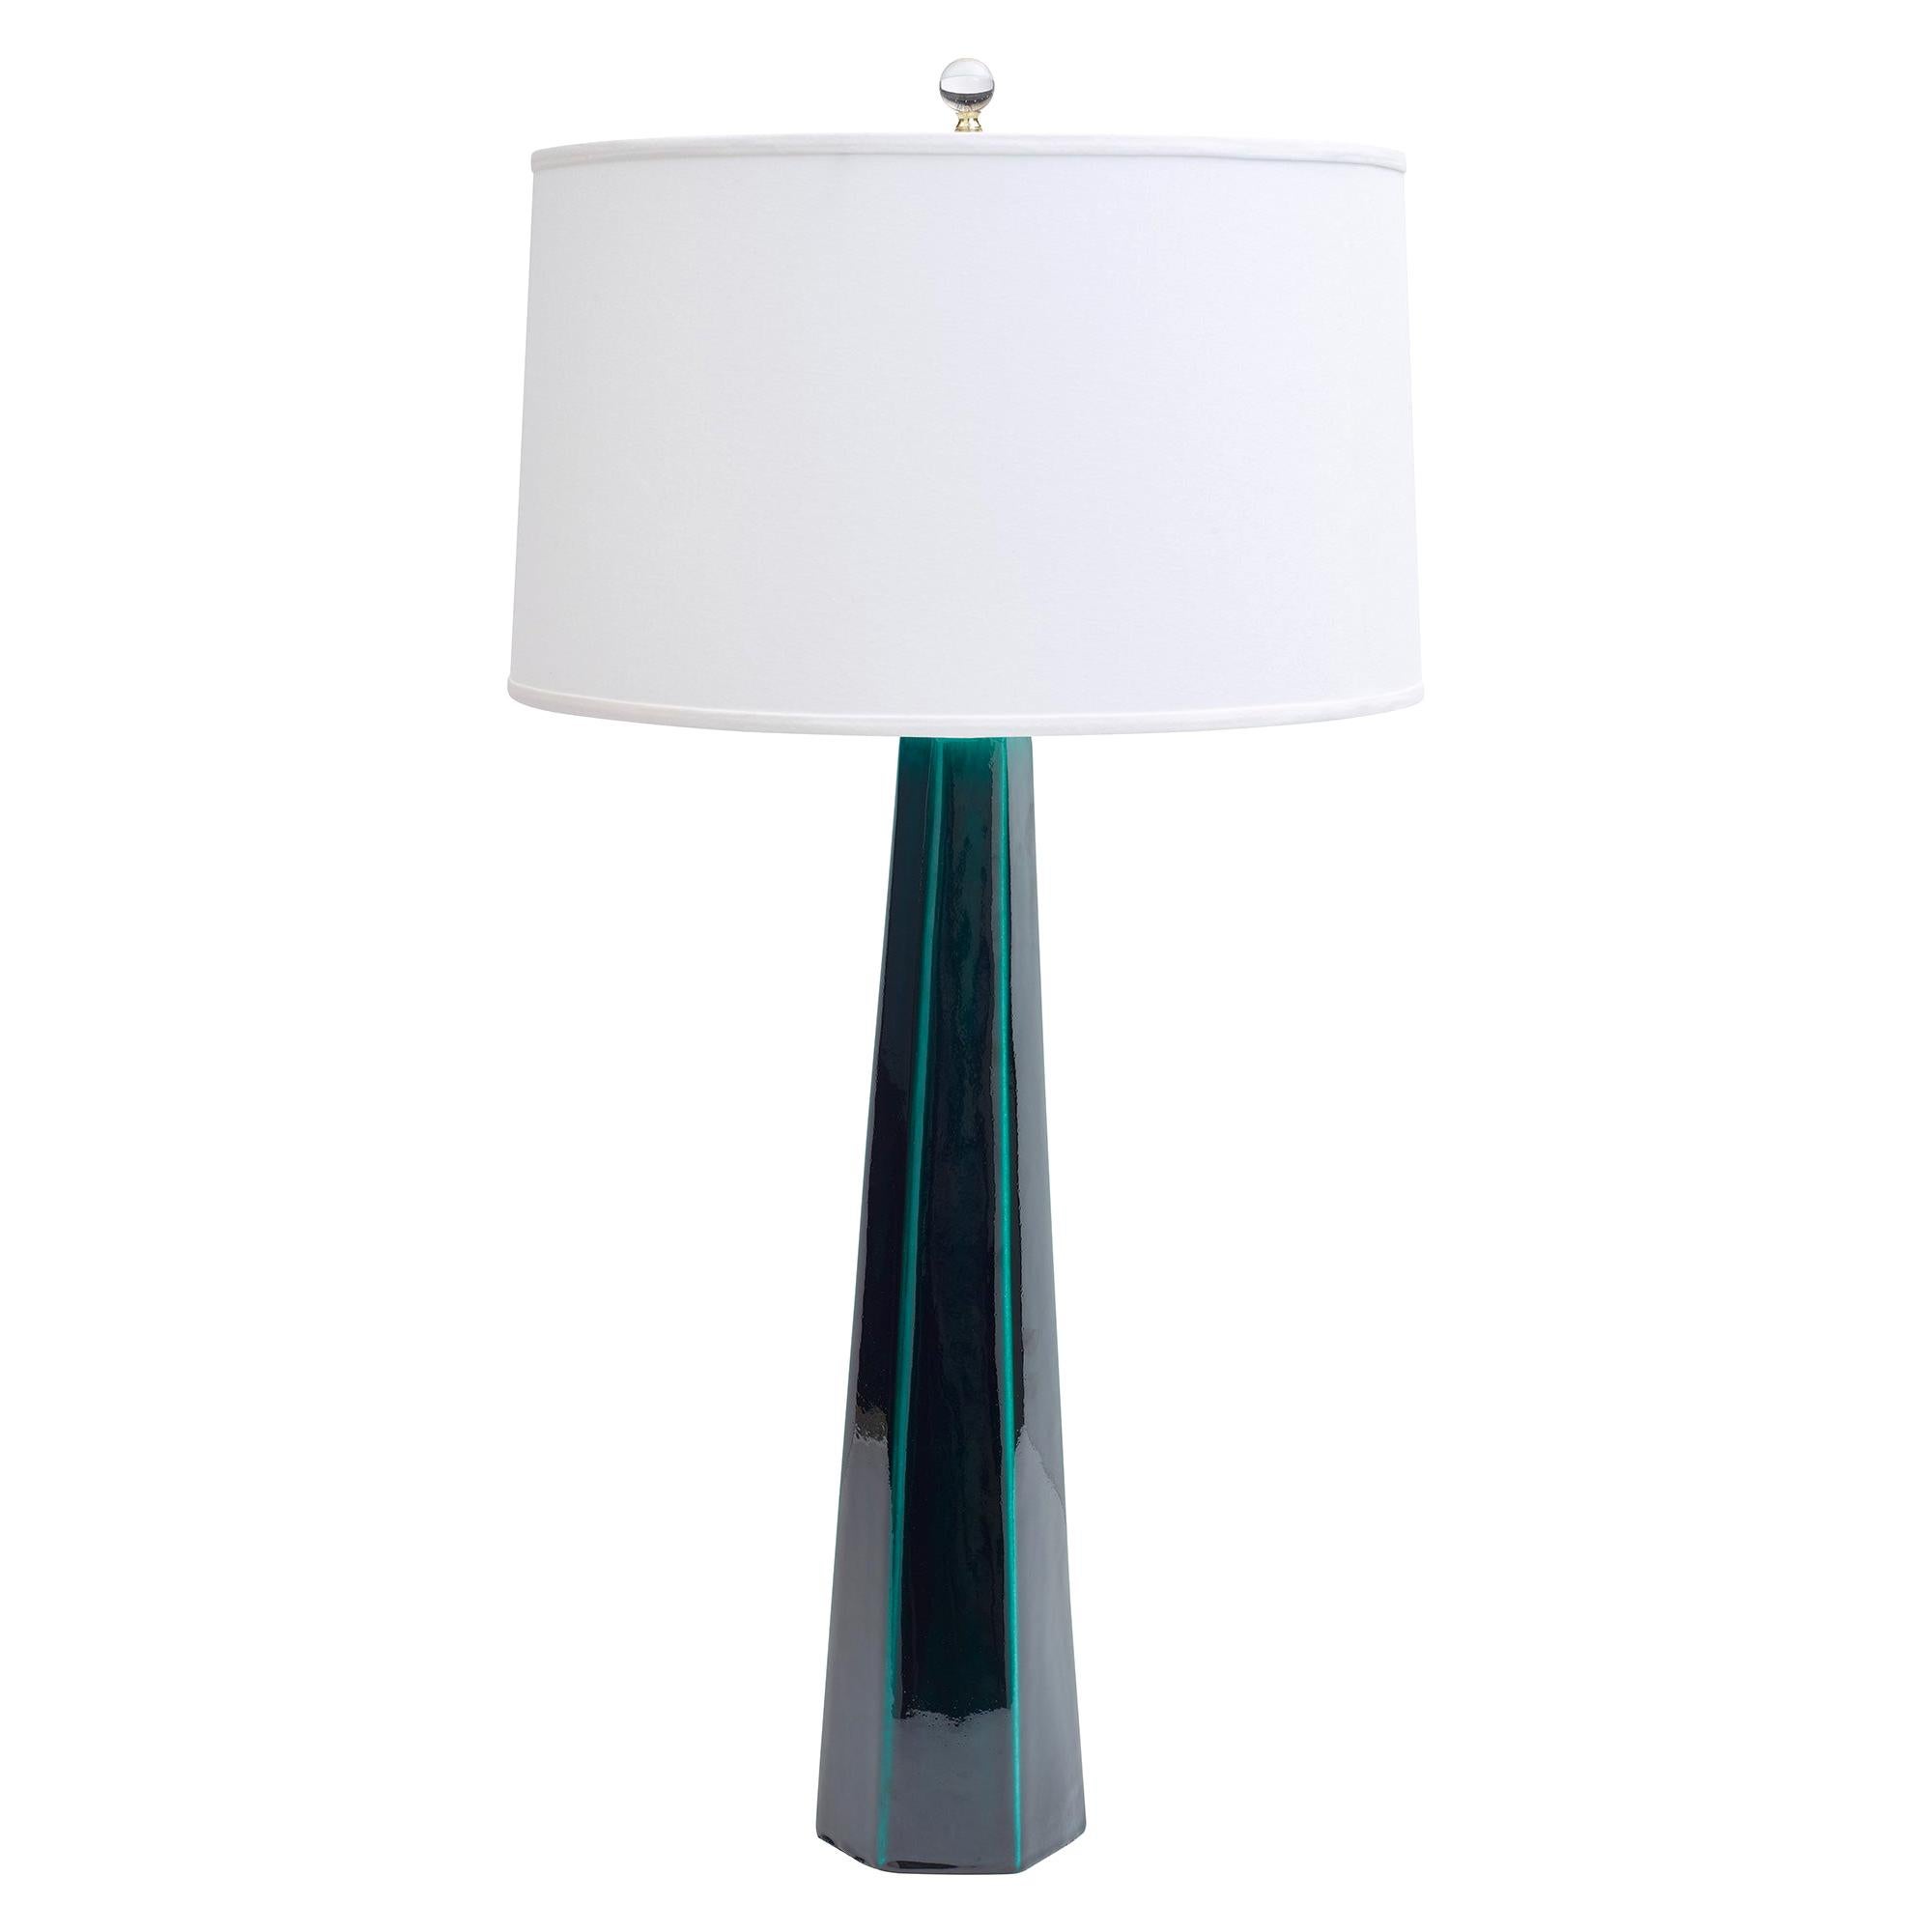 Jan Showers Luxor Column Table Lamp with Ivory Linen Shade for CuratedKravet